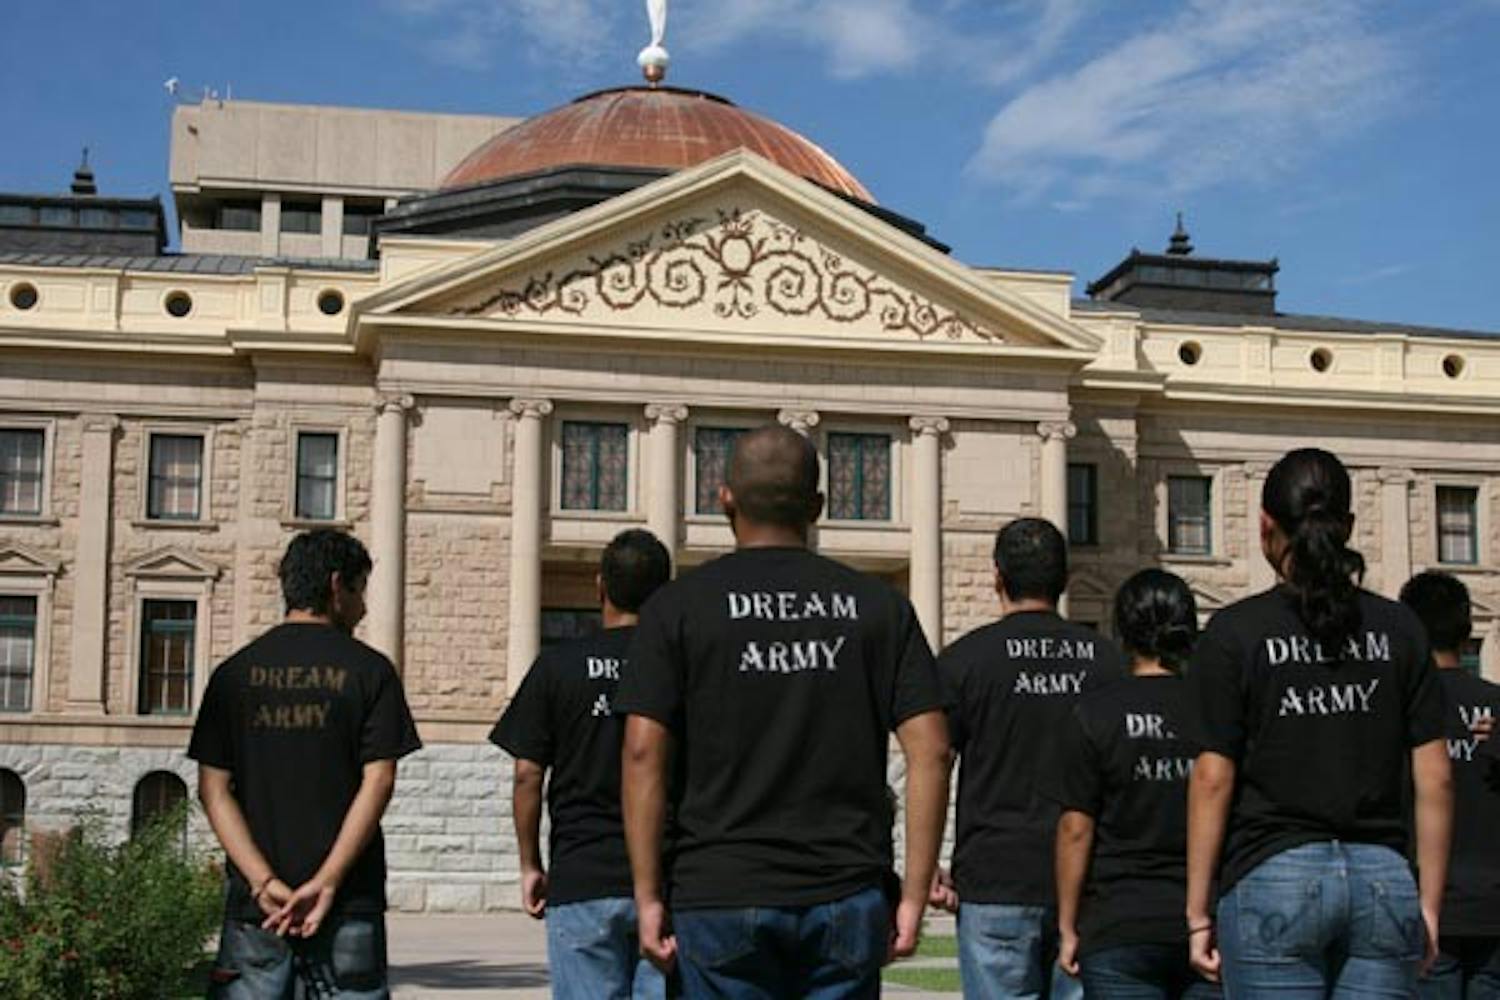 DREAM ARMY: Former JROTC students stand in front of the State Capitol building Tuesday performing military drills in connection to the Dream Act. (Photo by Anthony Sandoval)